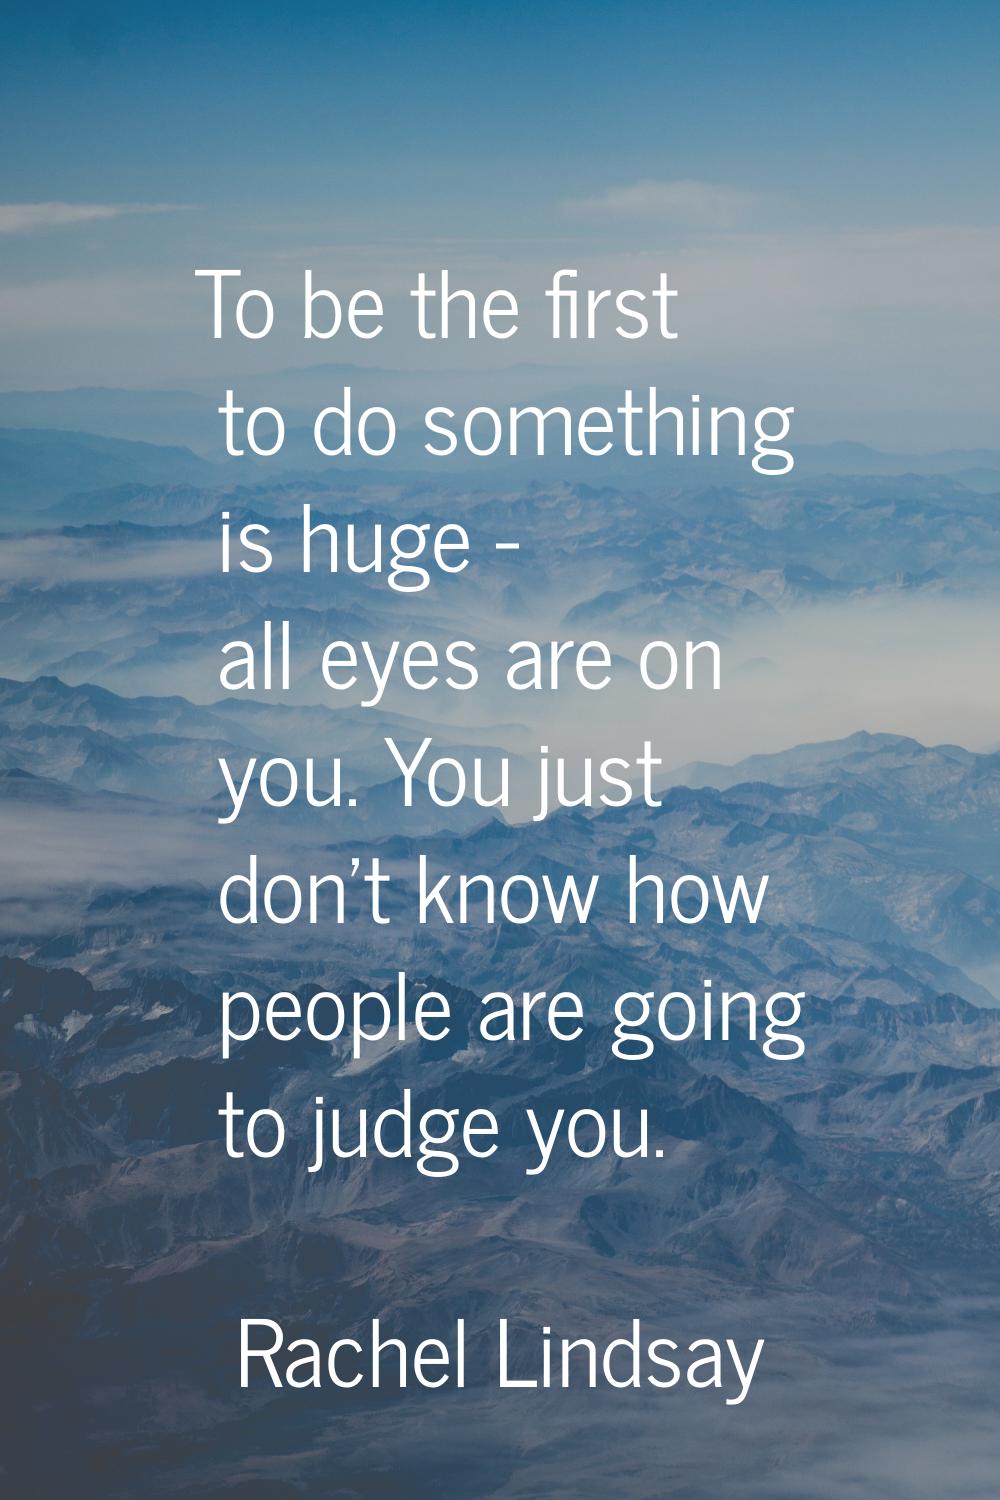 To be the first to do something is huge - all eyes are on you. You just don't know how people are g